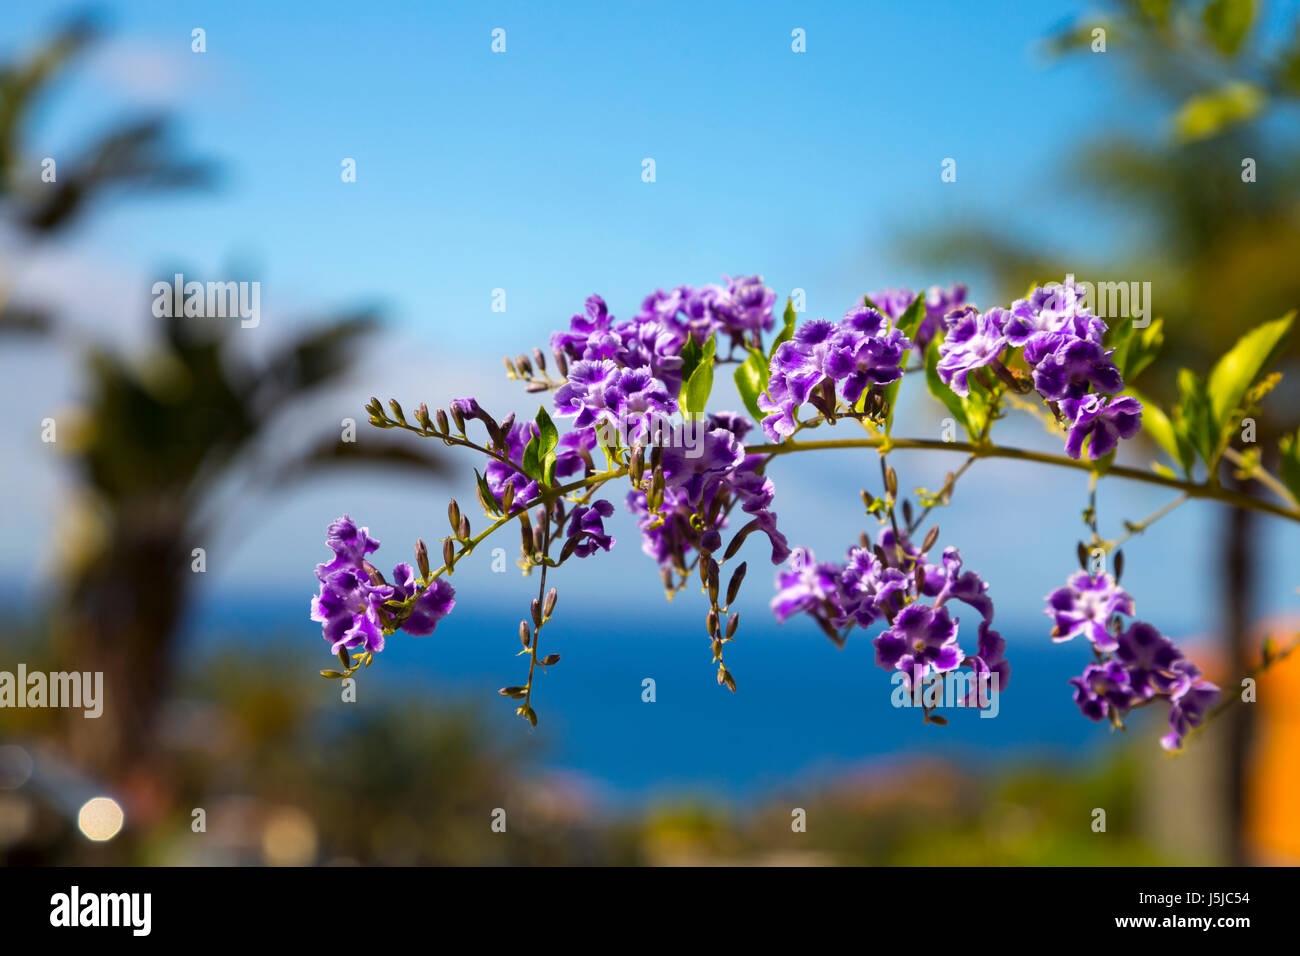 Small purple and white Golden dewdrop (Duranta erecta) flowers against the backdrop of ocean and palm trees, Tenerife, Spain Stock Photo